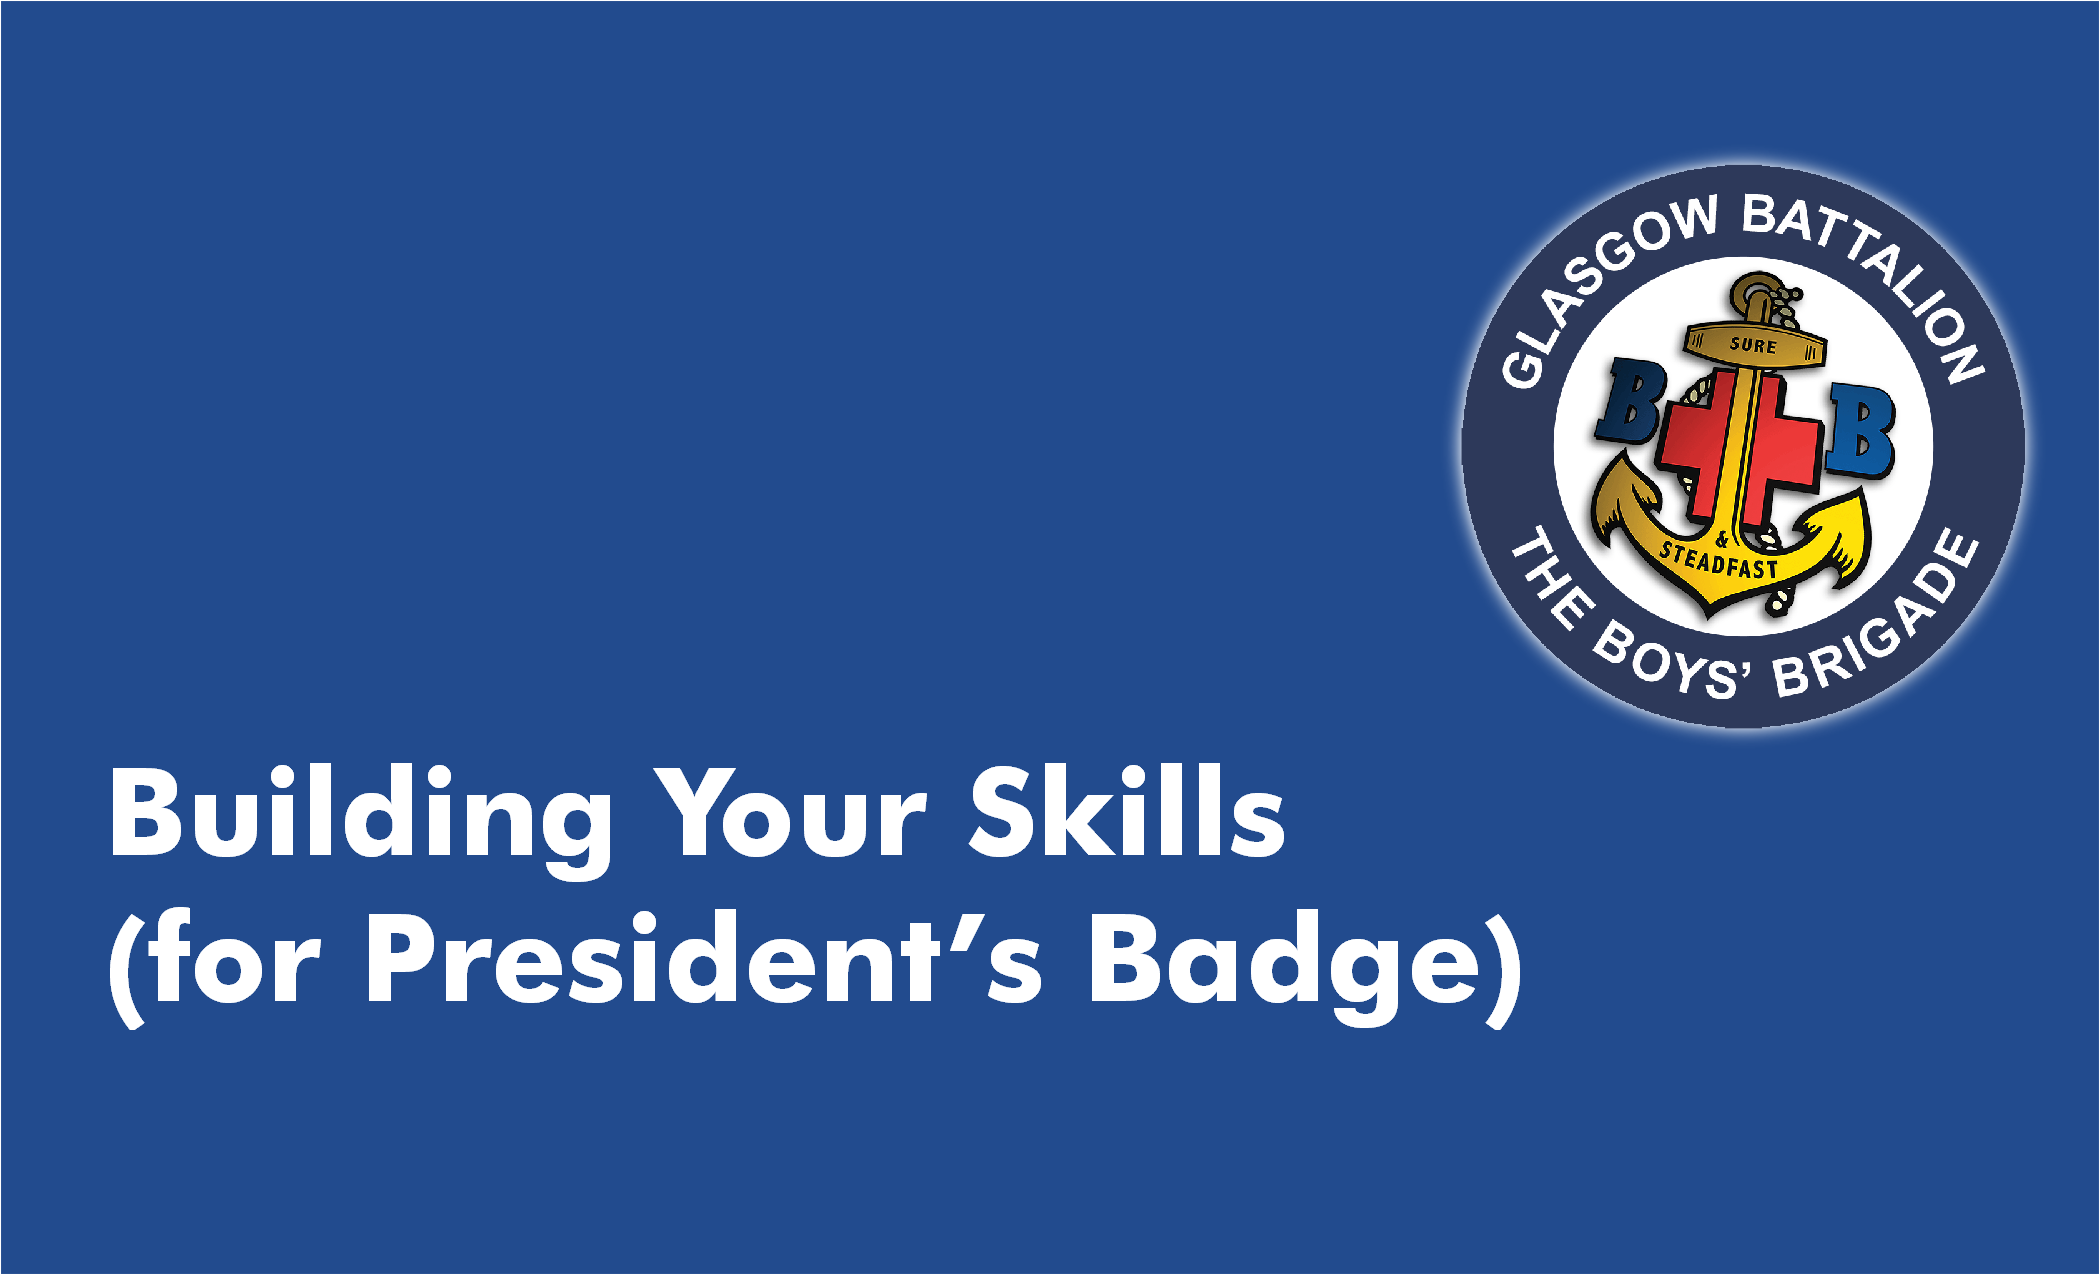 Building your Skills Course (for President's Badge) 